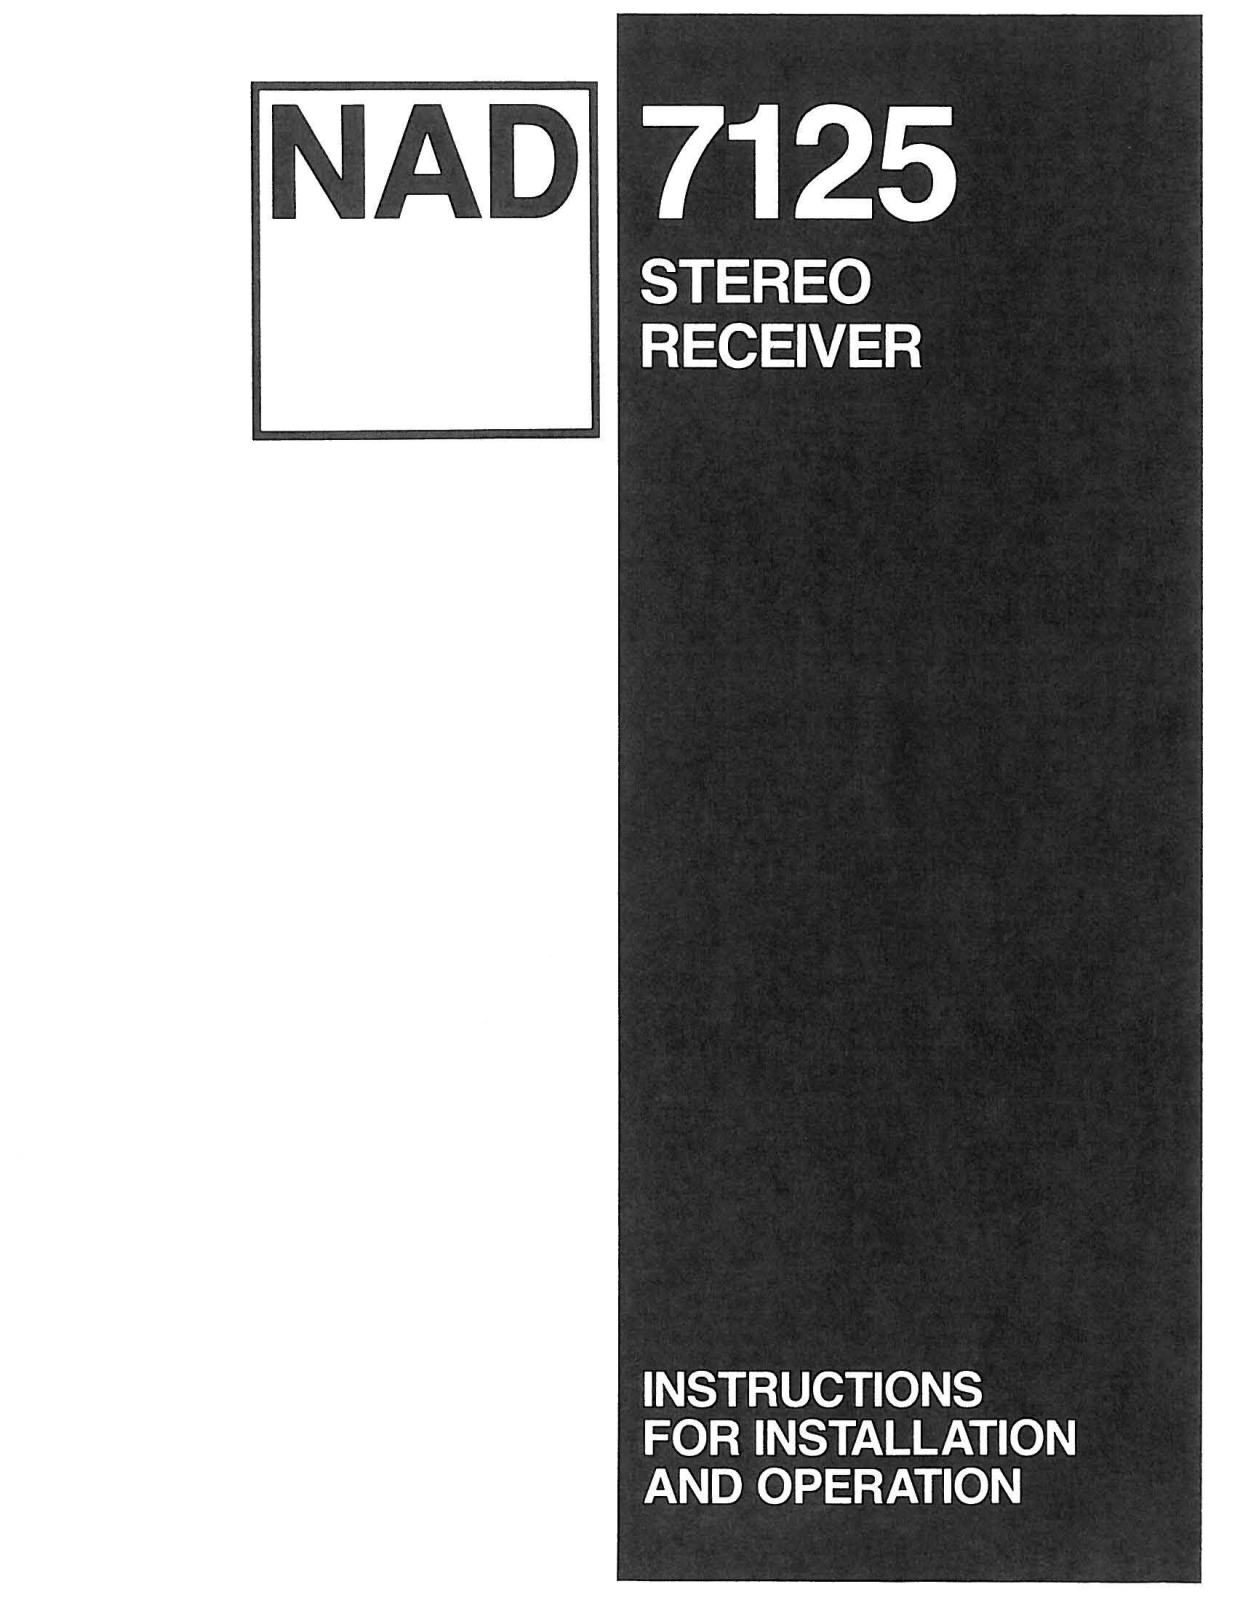 NAD 7125 Owners manual